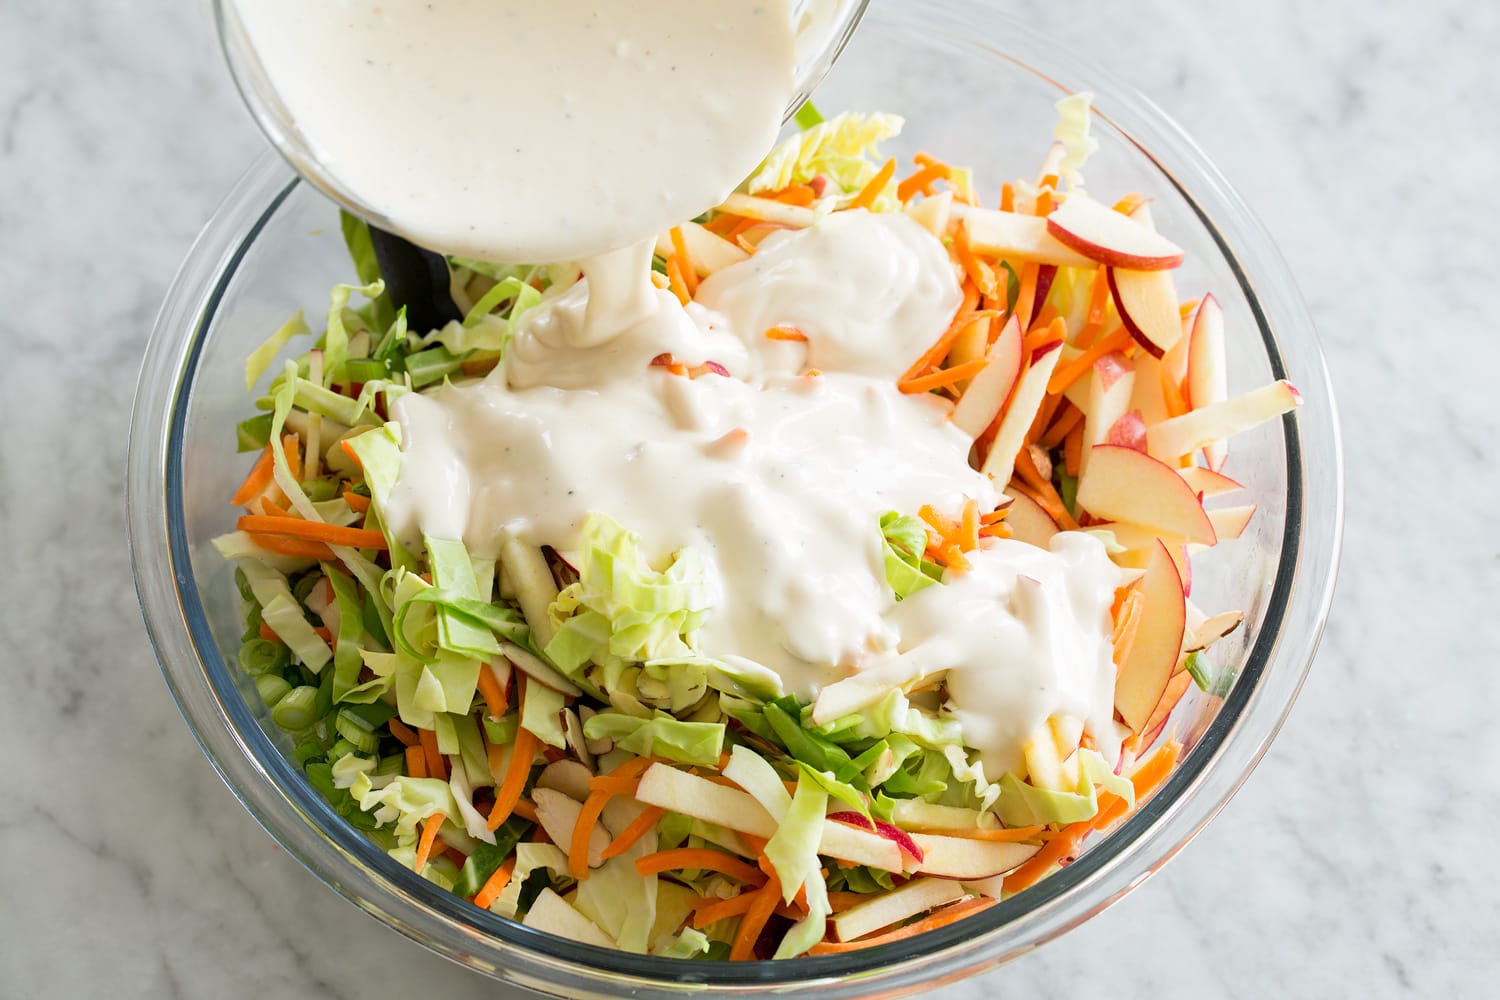 Slaw being topped with dressing.